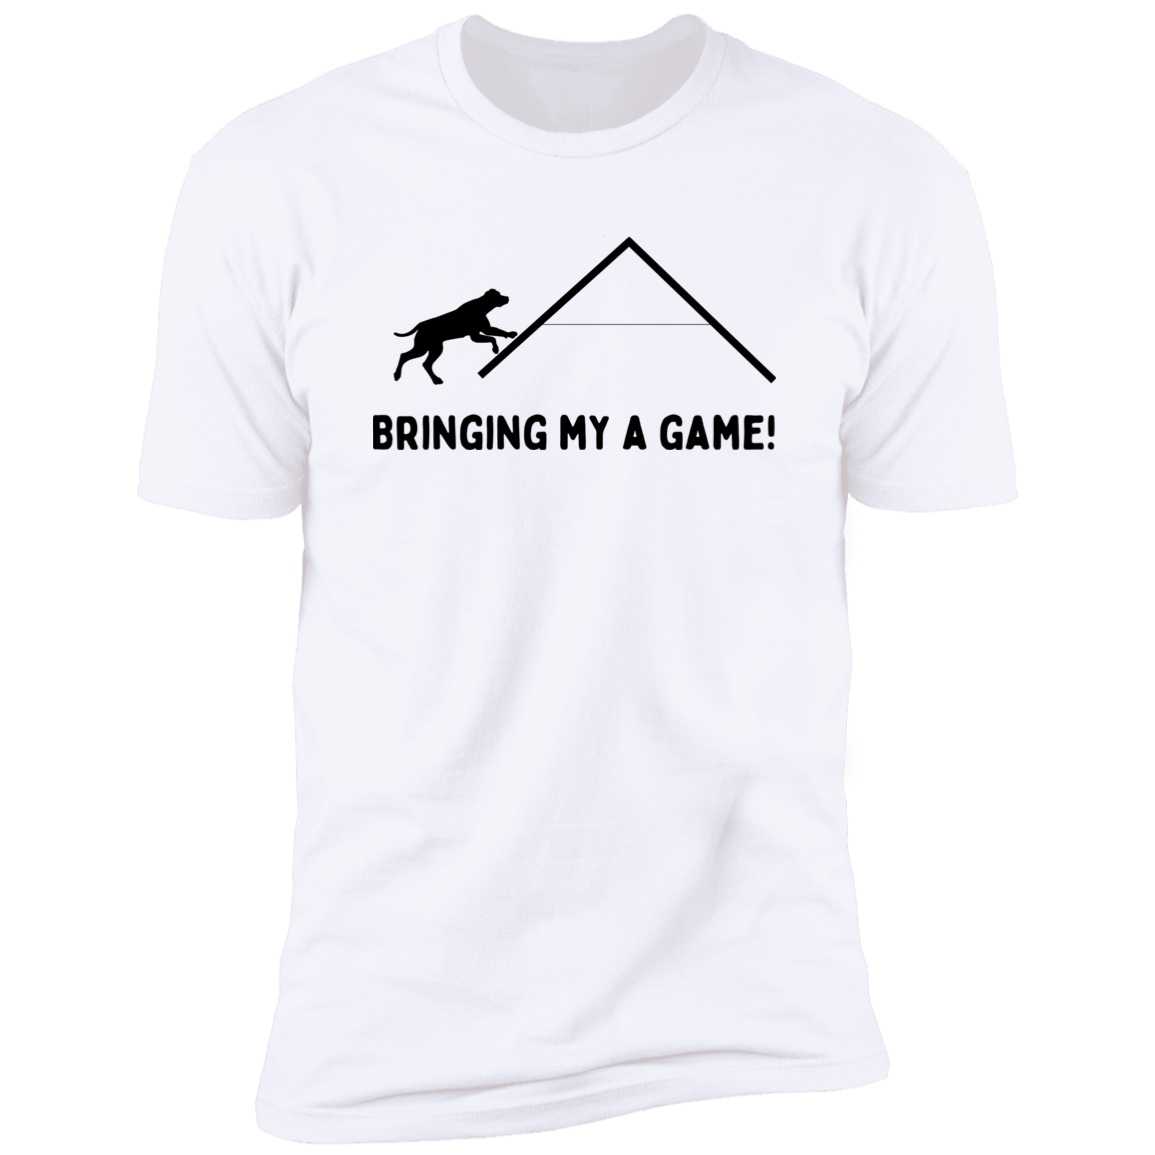 Bringing My A Game Agility T-shirt, Dog Agility Shirt for humans, in white